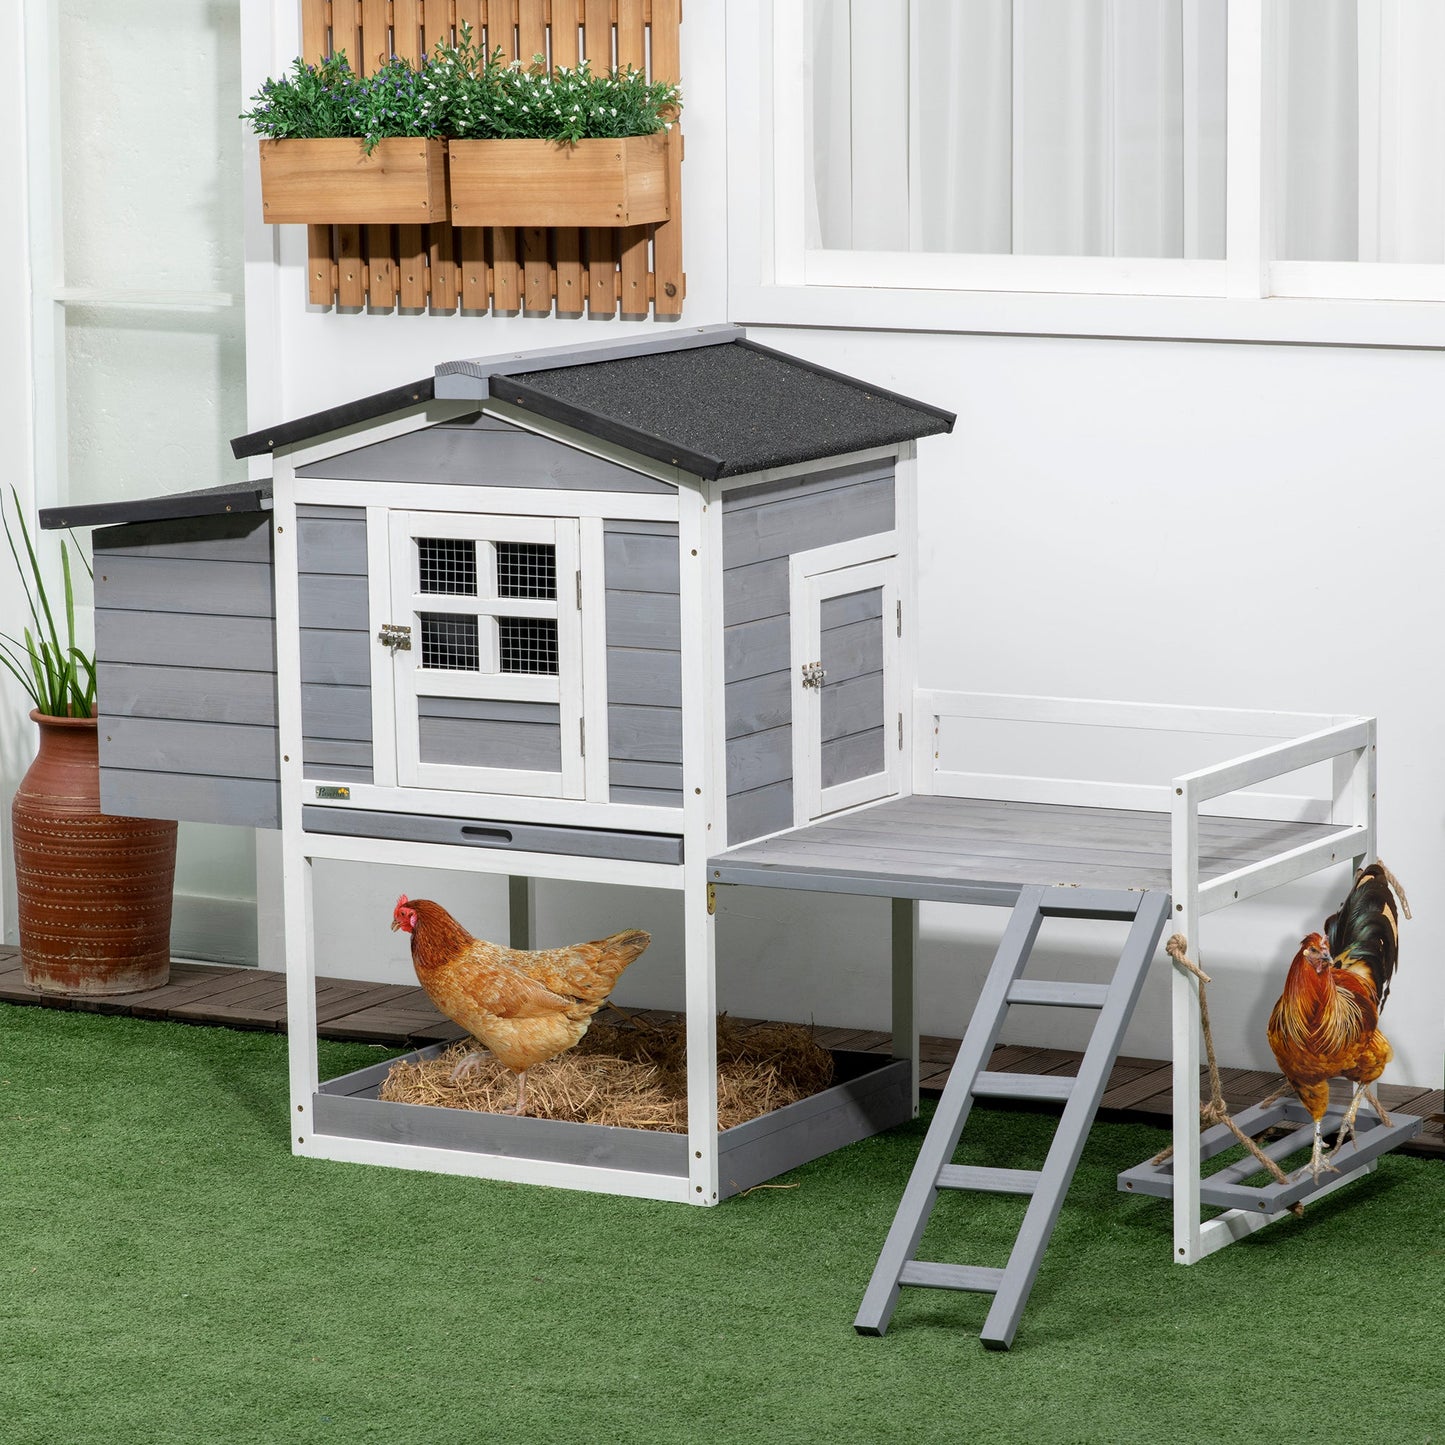 65" Chicken Coop with Swing Toy, Wooden Hen House with Nesting Box, 2 Rooms, Removable Tray, Asphalt Roof, Ramp, Outdoor Poultry Cage at Gallery Canada